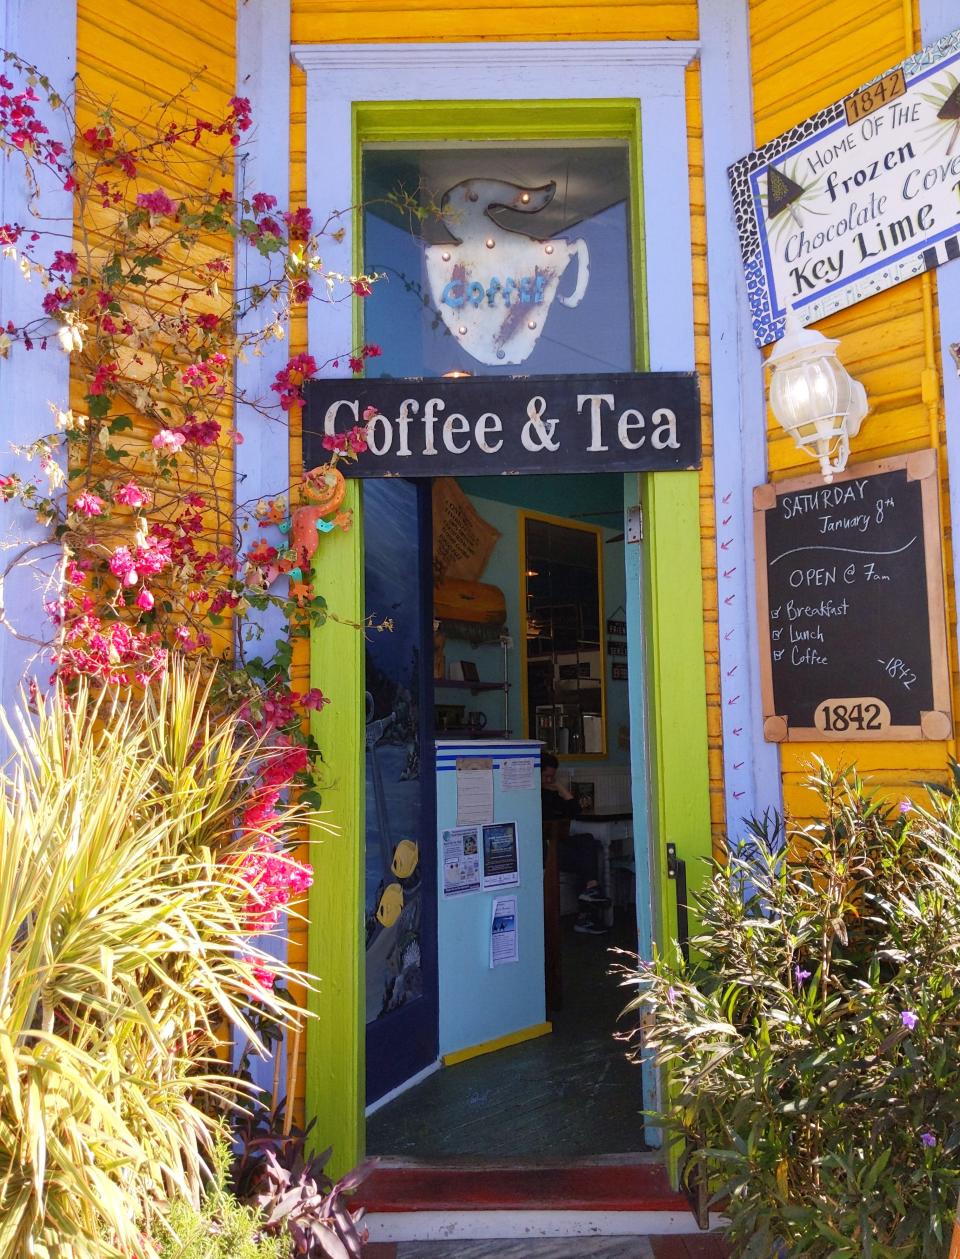 The colorful entrance of a coffee and tea shop.